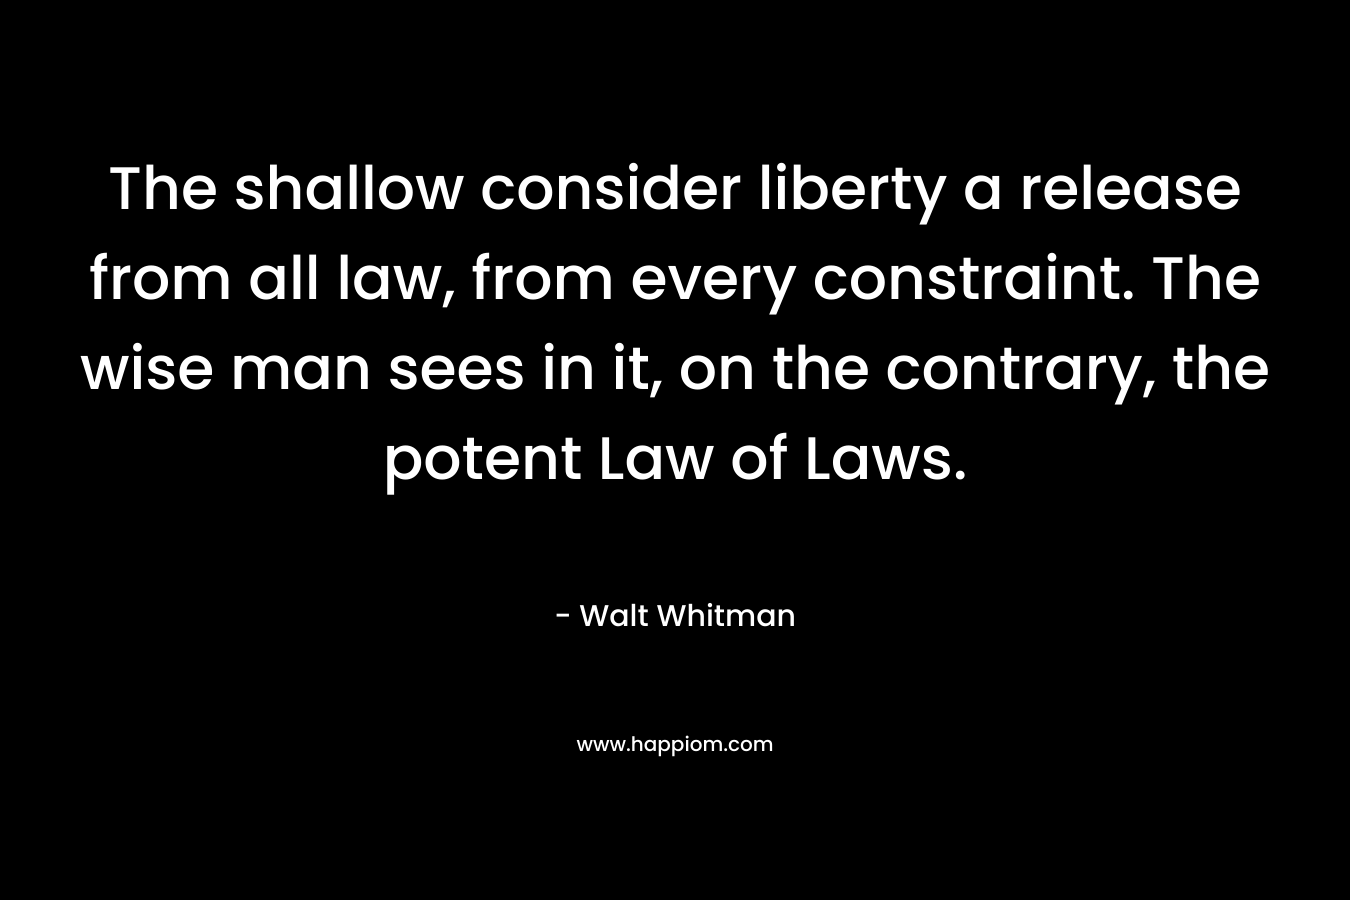 The shallow consider liberty a release from all law, from every constraint. The wise man sees in it, on the contrary, the potent Law of Laws.